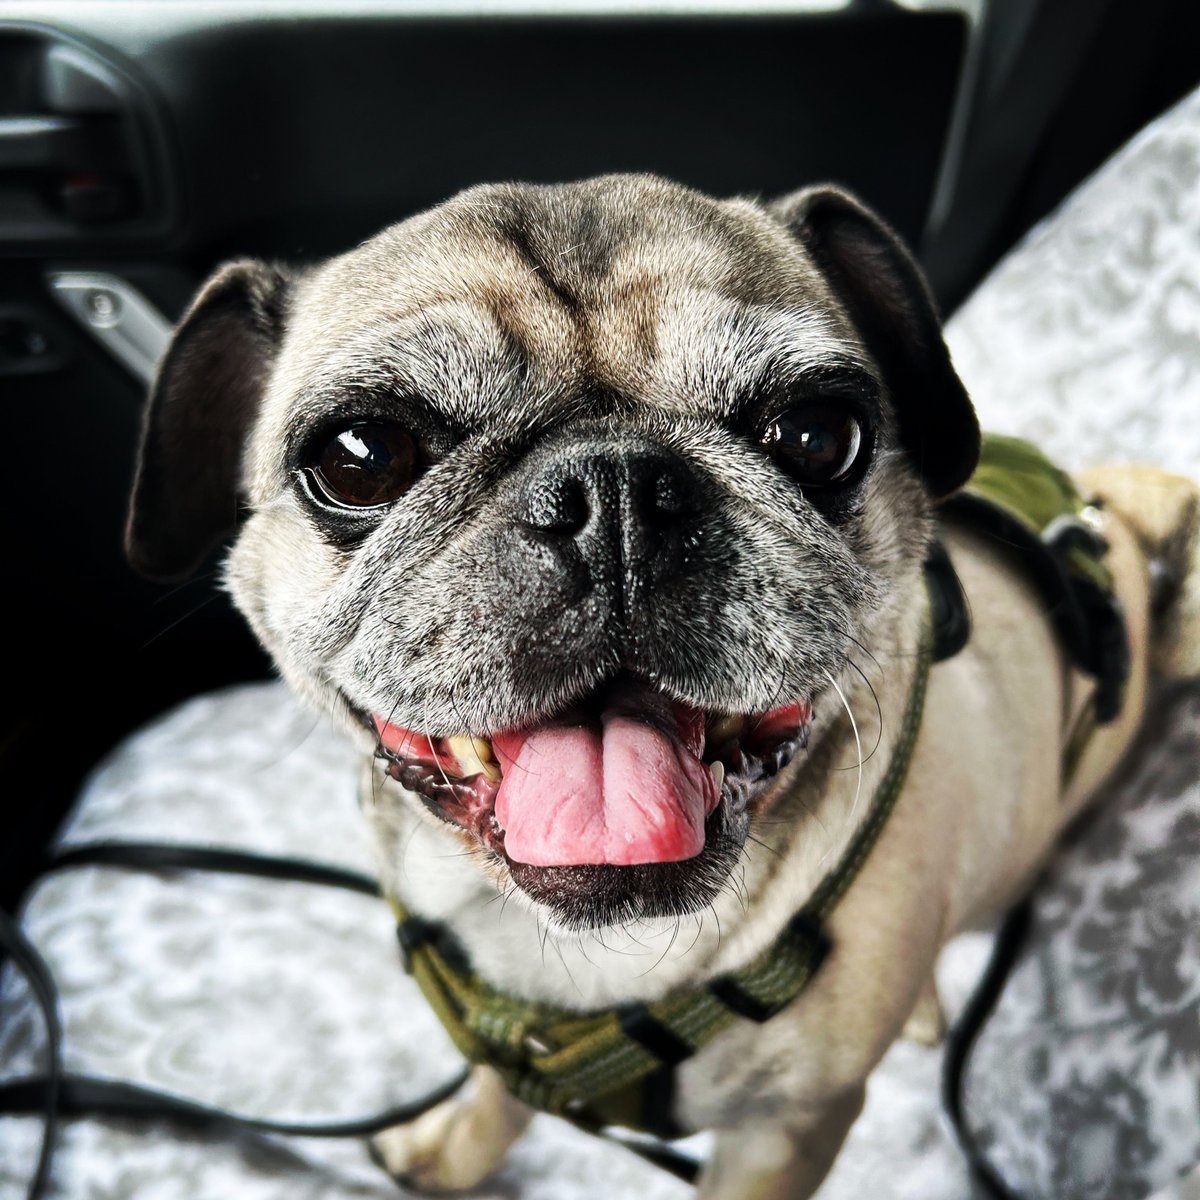 Today is National Rescue Dog Day and we're featuring Emergency Management Specialist, Stephanie's dog, Charlotte. Charlotte is a pug rescued from Gwinnett County Animal Shelter. Stephanie says Charlotte loves breakfast, dinner, and snacks (in that order) and hates thunderstorms!